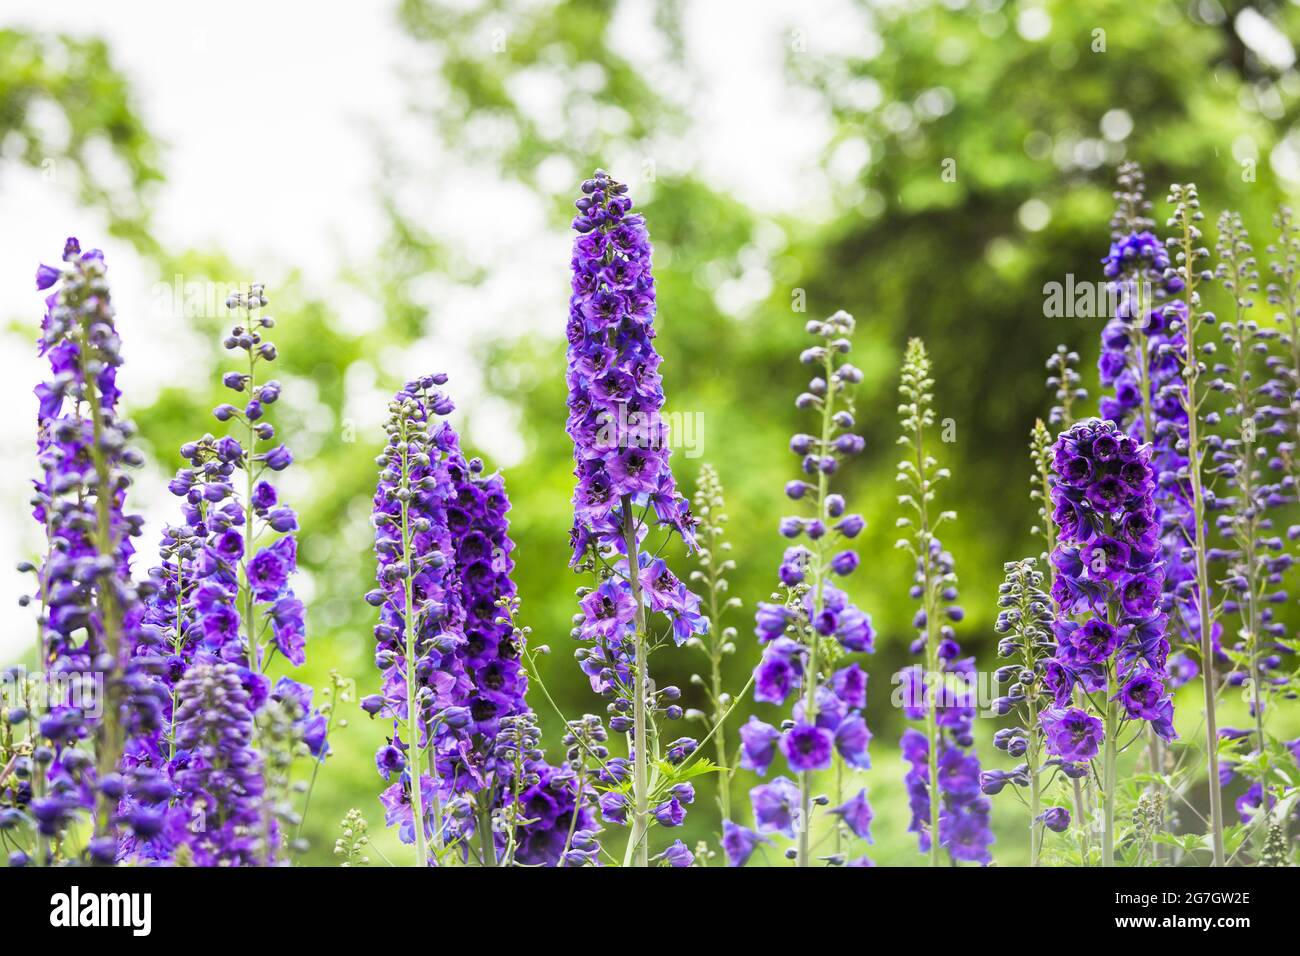 candle larkspur (Delphinium elatum), Several blooming Doubtful knight's-spurs, Germany Stock Photo